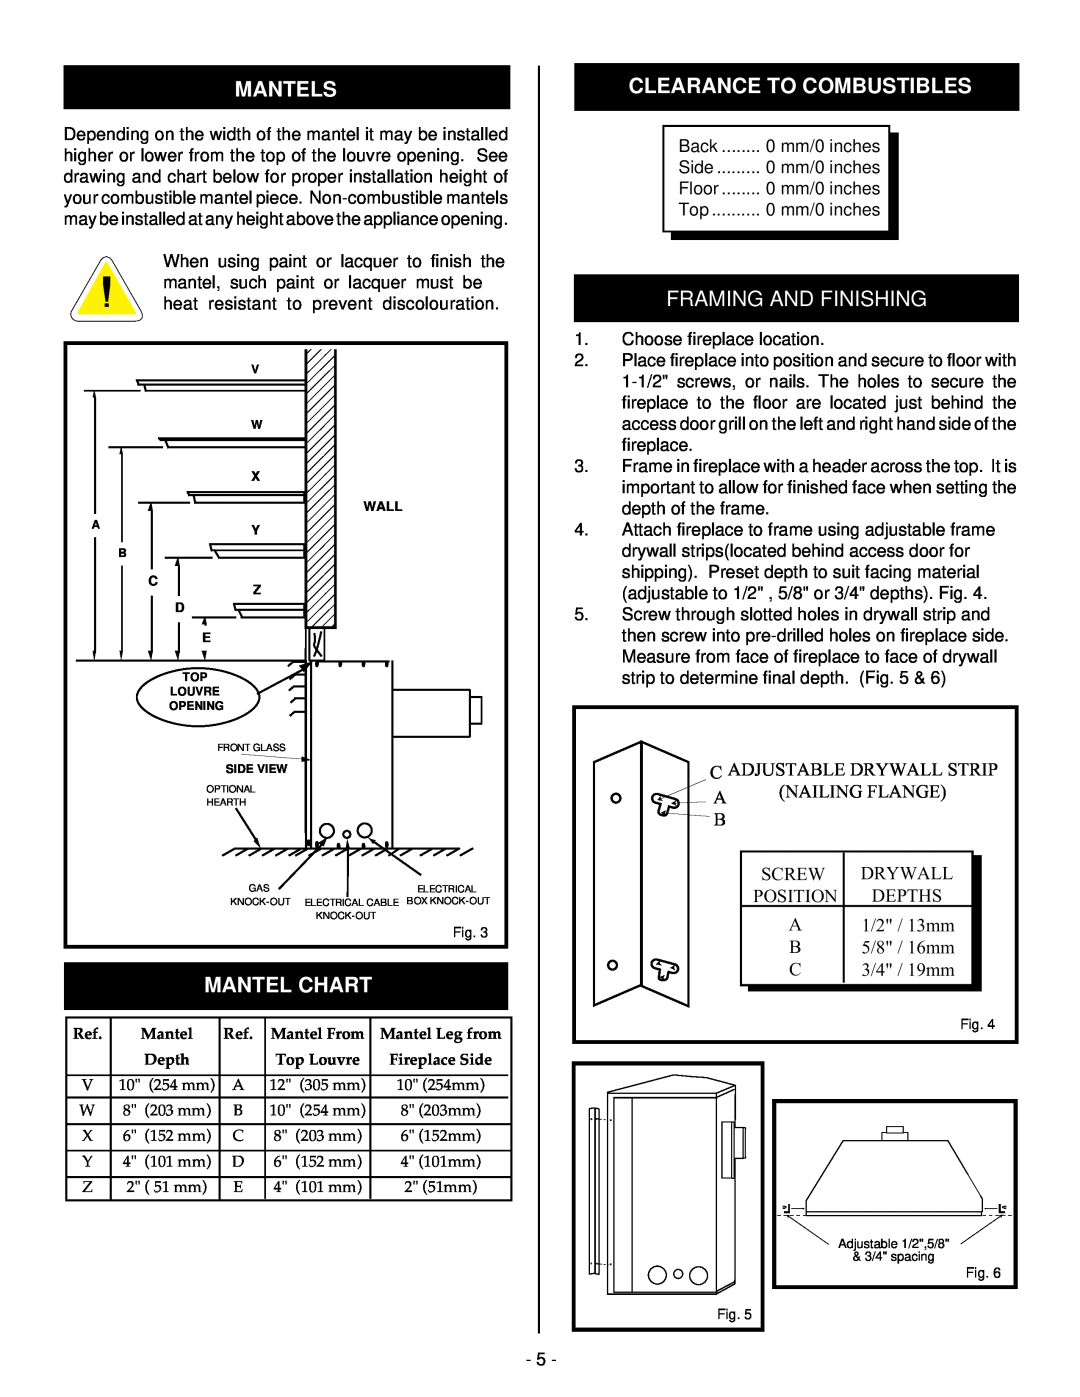 Vermont Casting BHDR36 installation instructions Mantels, Mantel Chart, Clearance To Combustibles, Framing And Finishing 